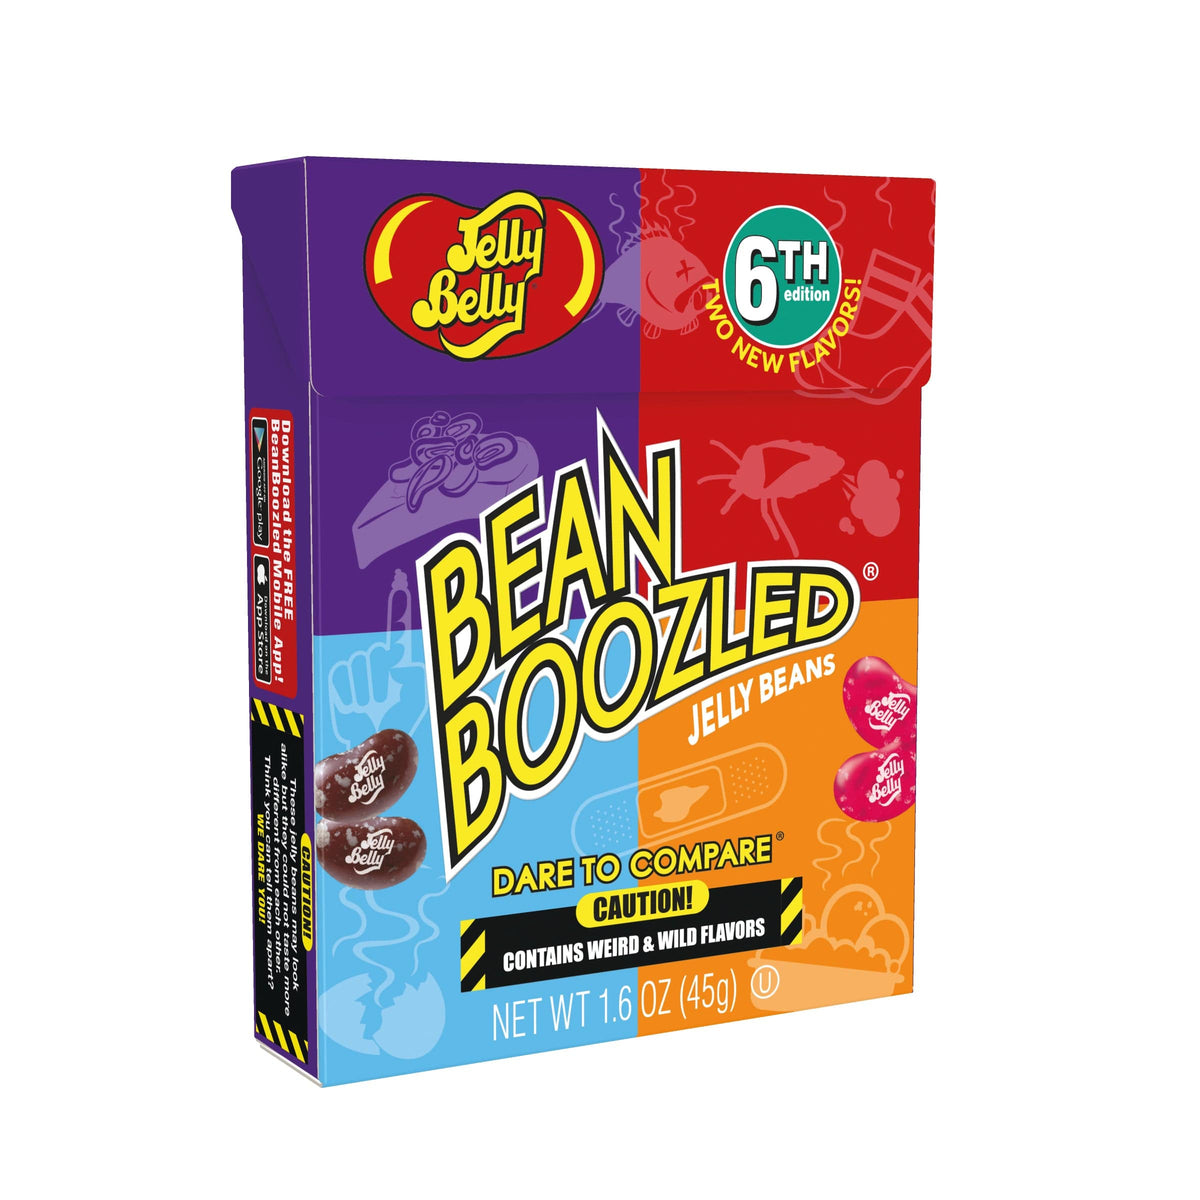 Lolli and Pops Novelty Jelly Belly BeanBoozled Flip Top Box